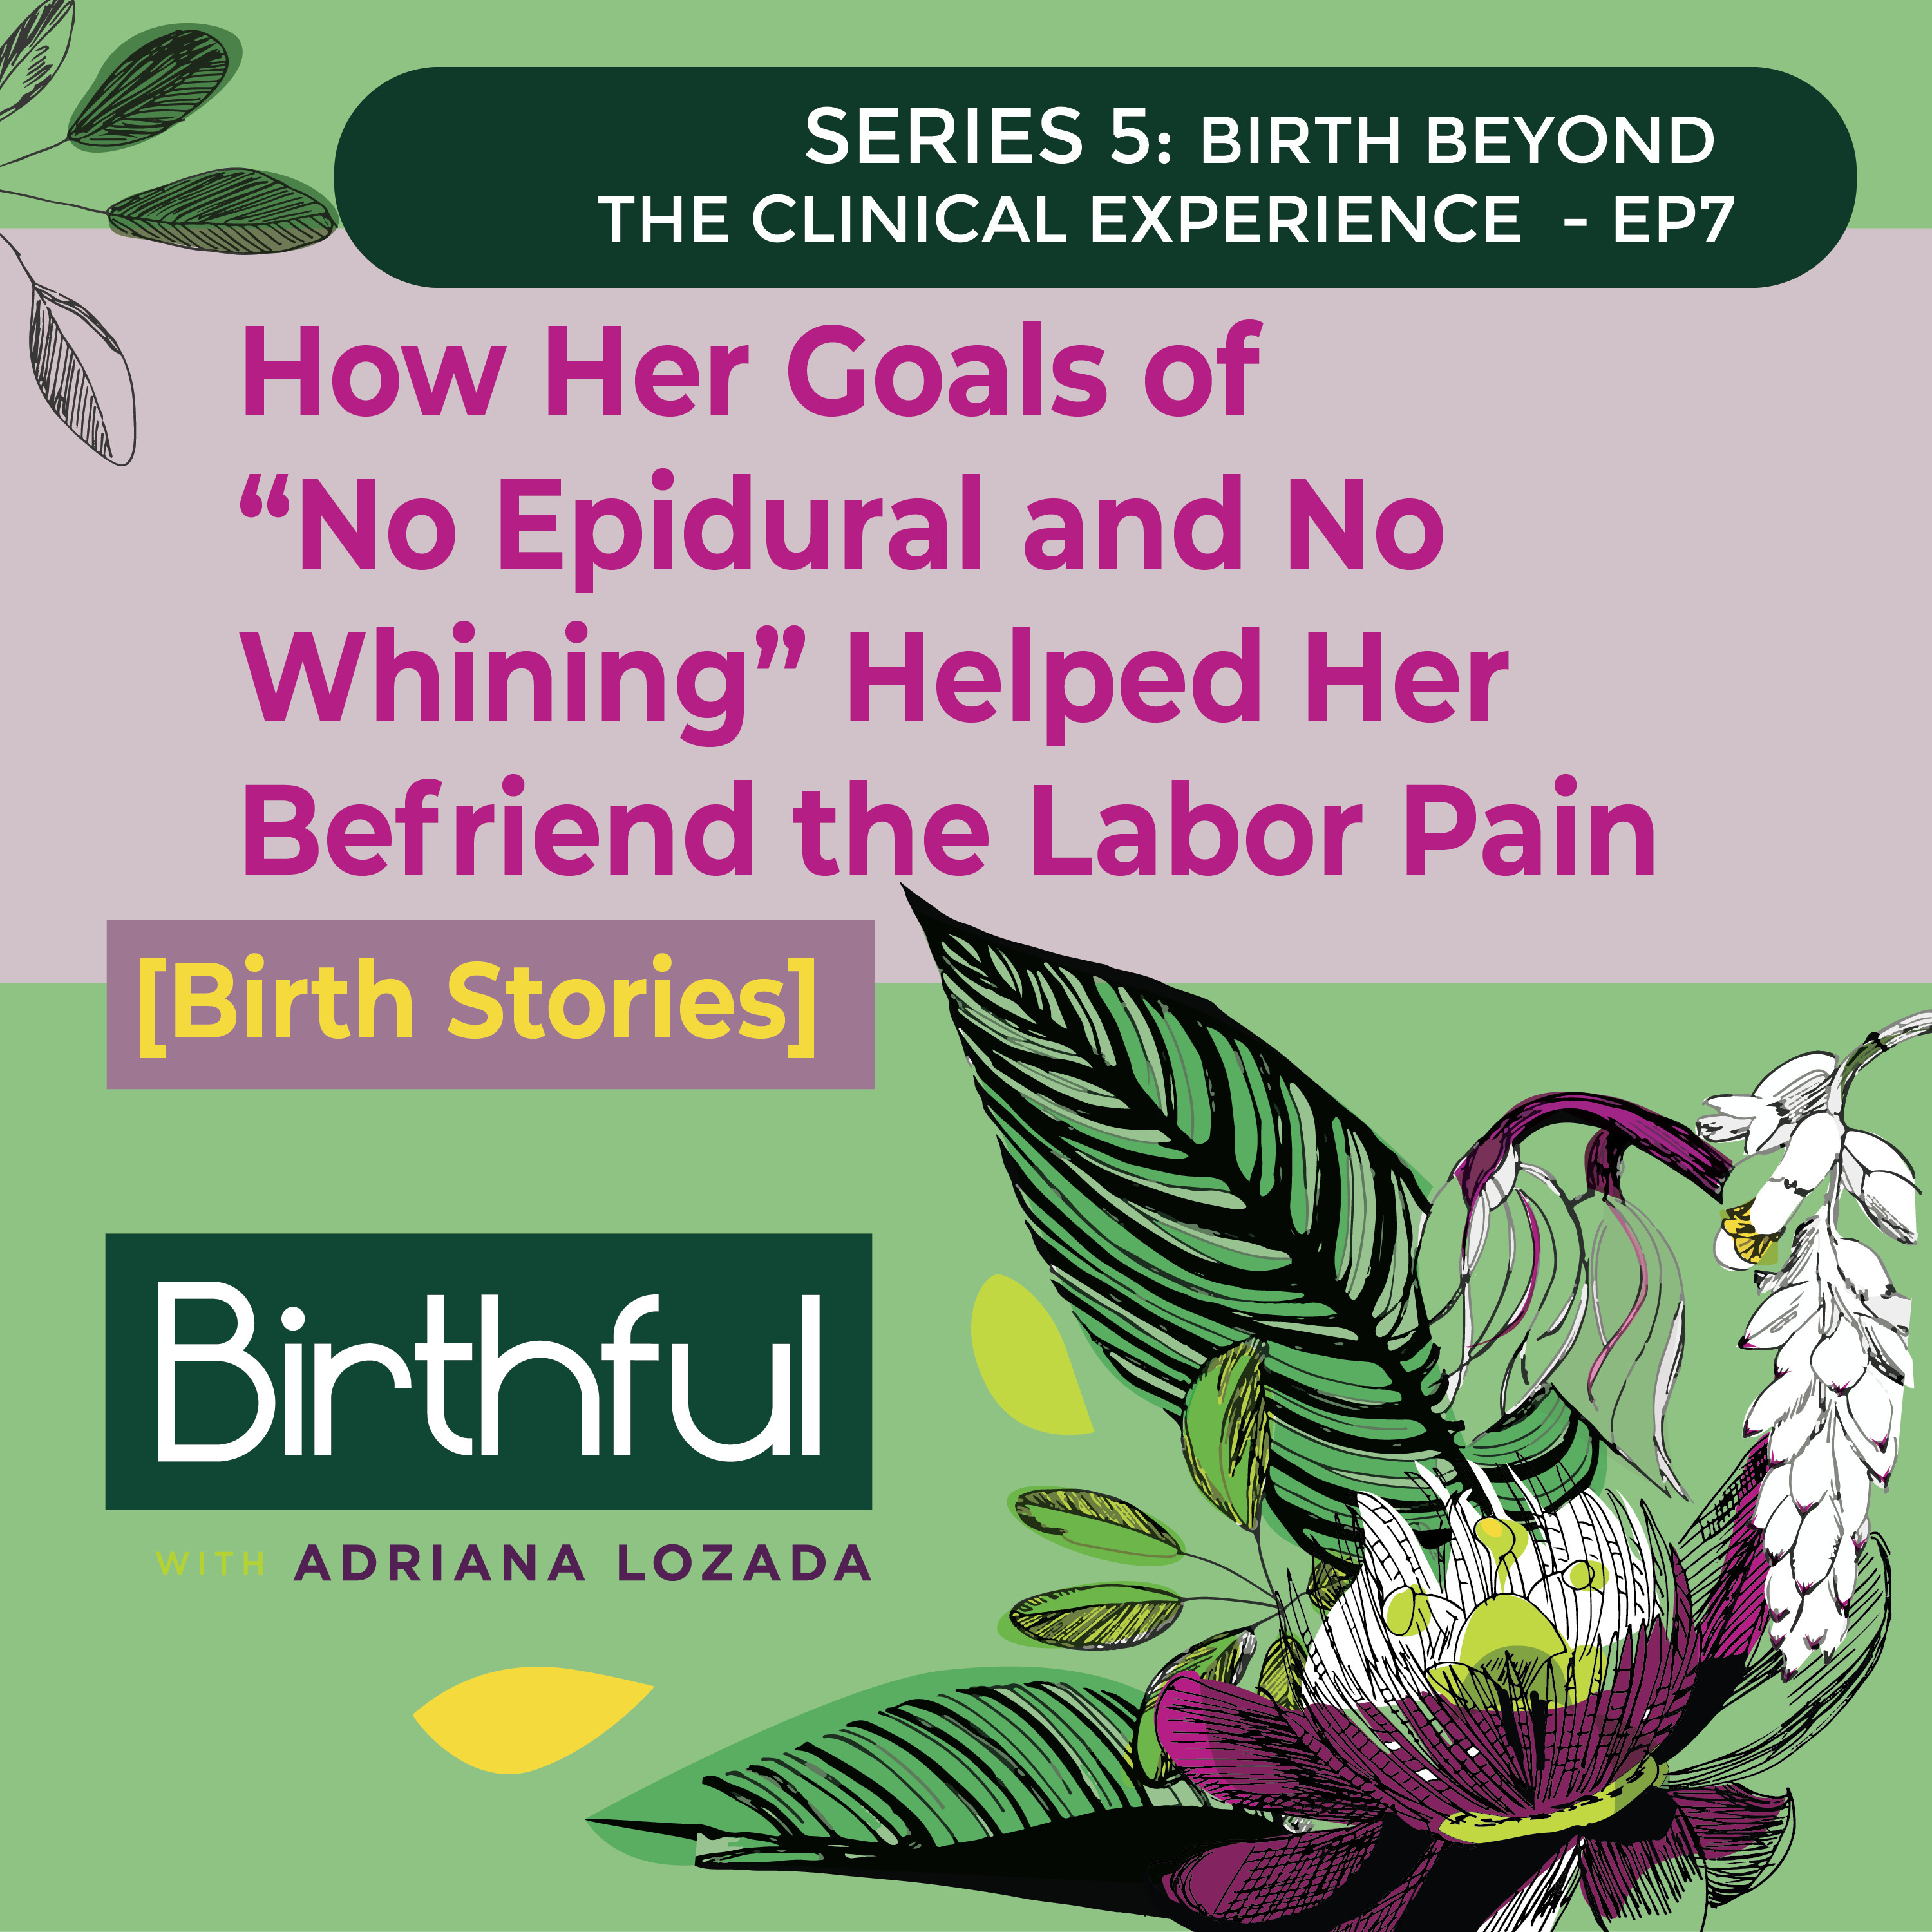 [Birth Stories]  How Her Goals of “No Epidural and No Whining” Helped Her Befriend the Labor Pain